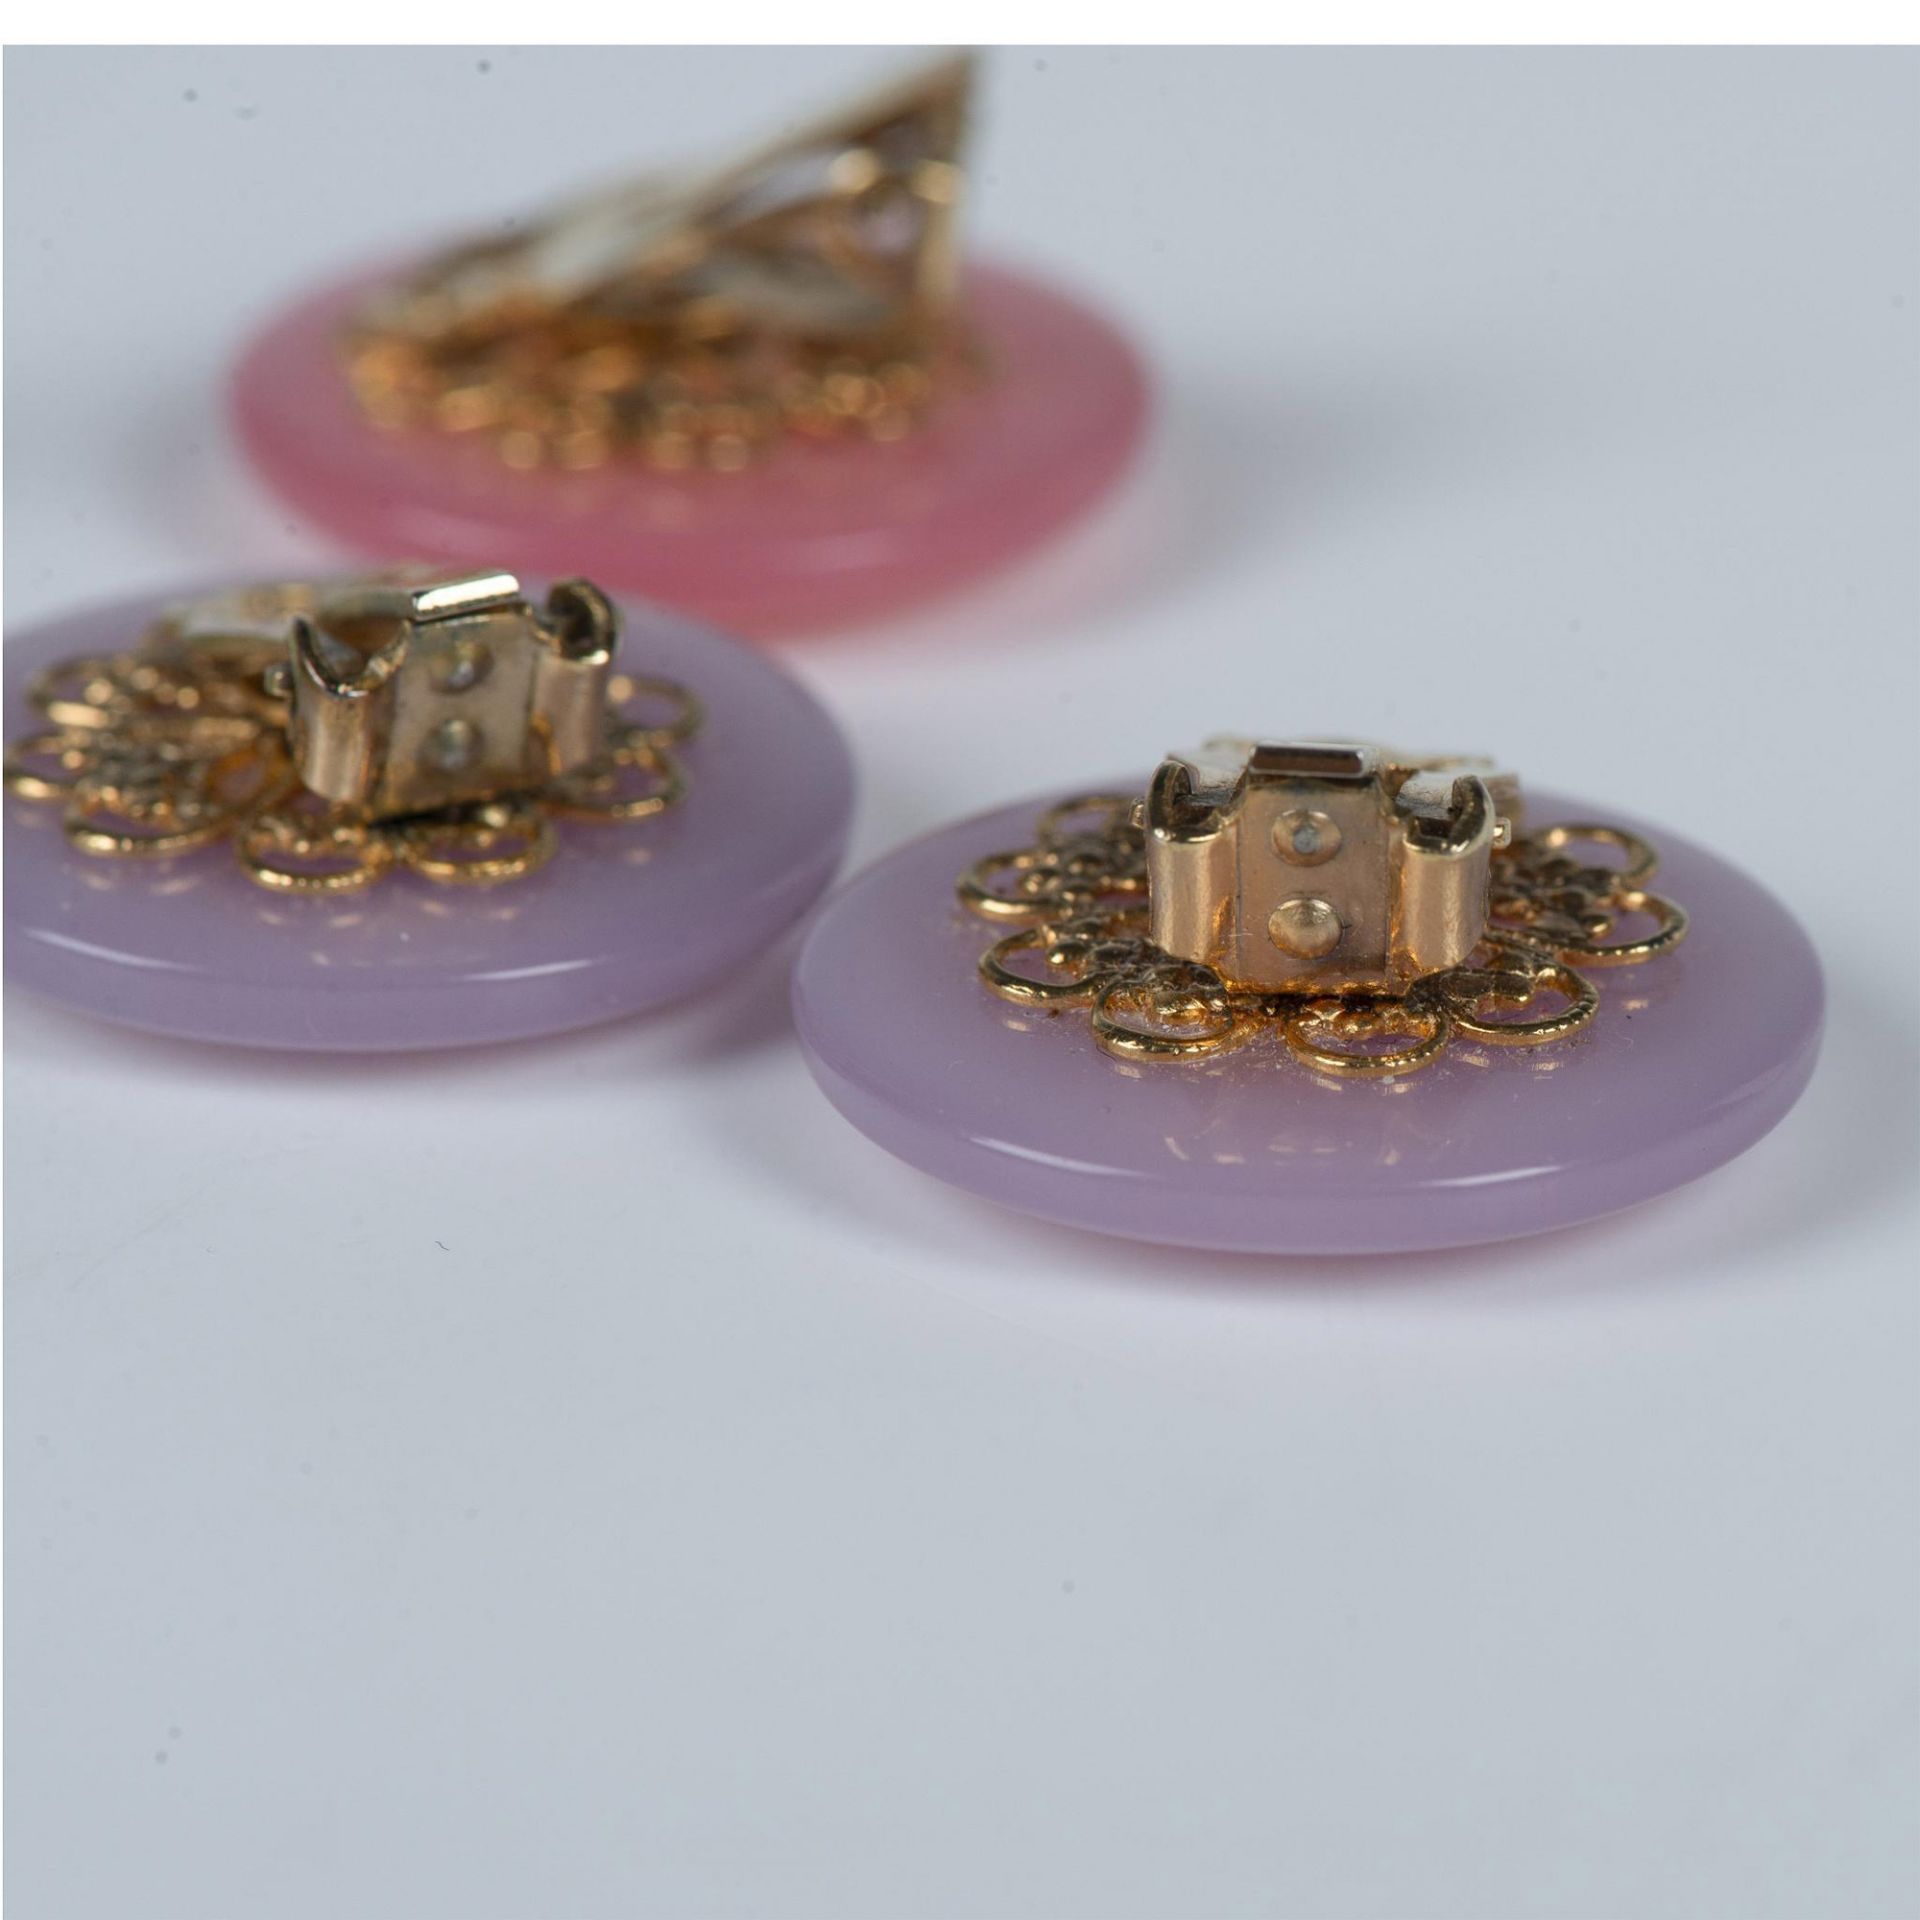 4 Pairs of Pretty Pastel Round Clip-On Earrings - Image 5 of 8